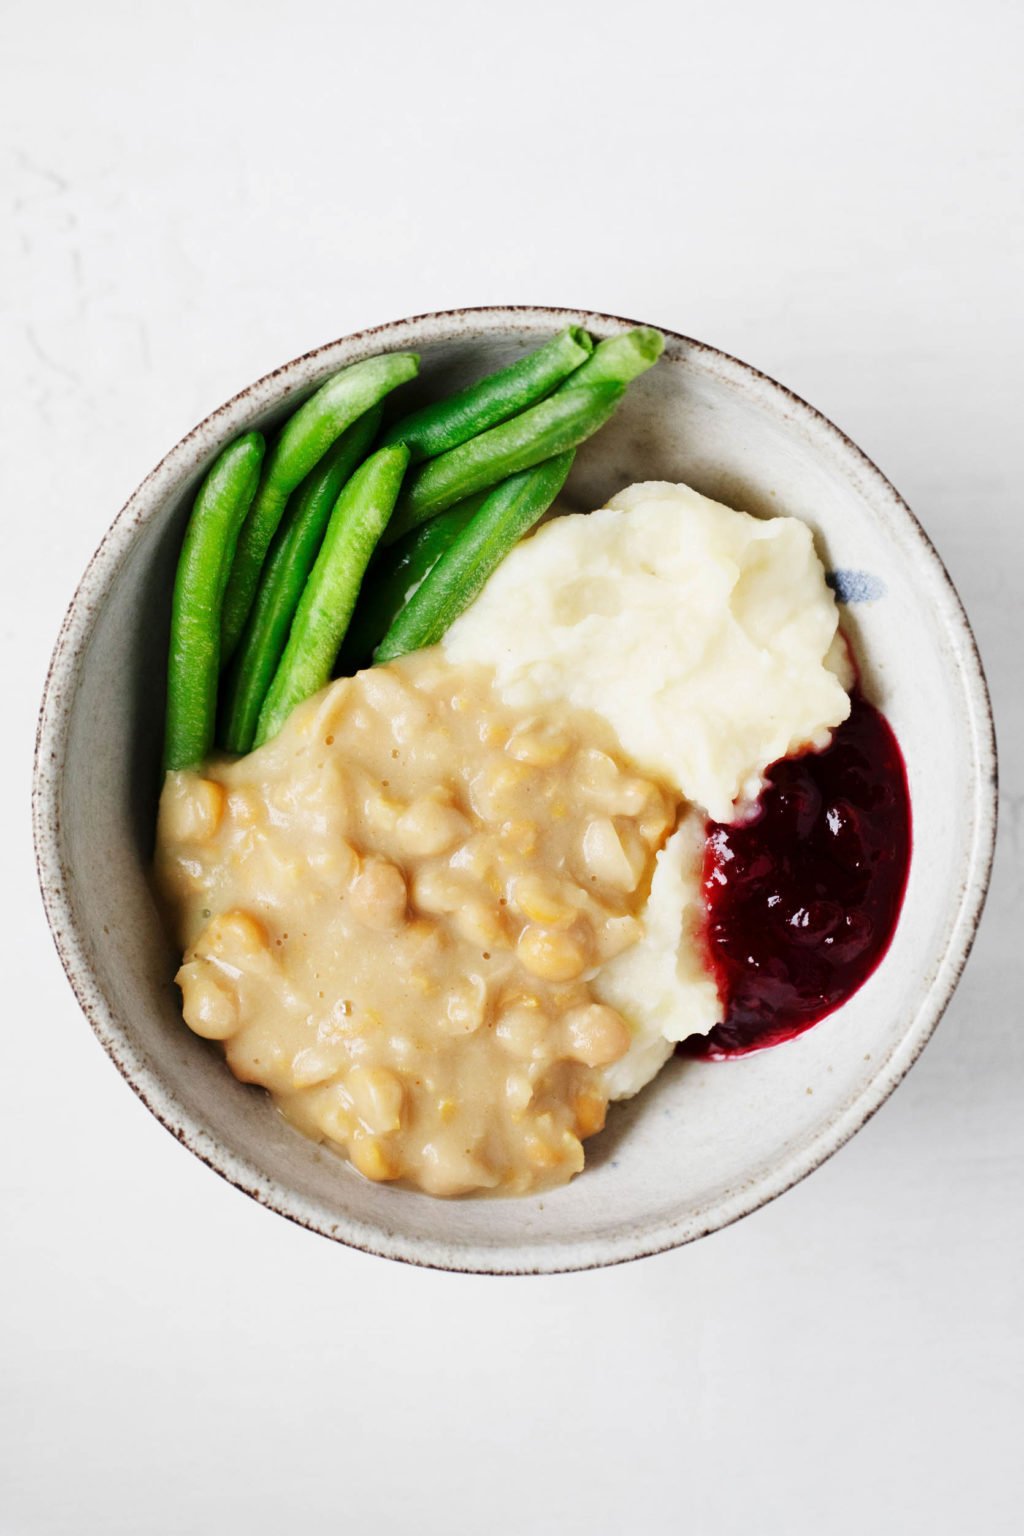 Chickpeas are paired with a savory gravy, mashed potatoes, cranberry sauce, and green beans for a filling vegan holiday bowl of food.